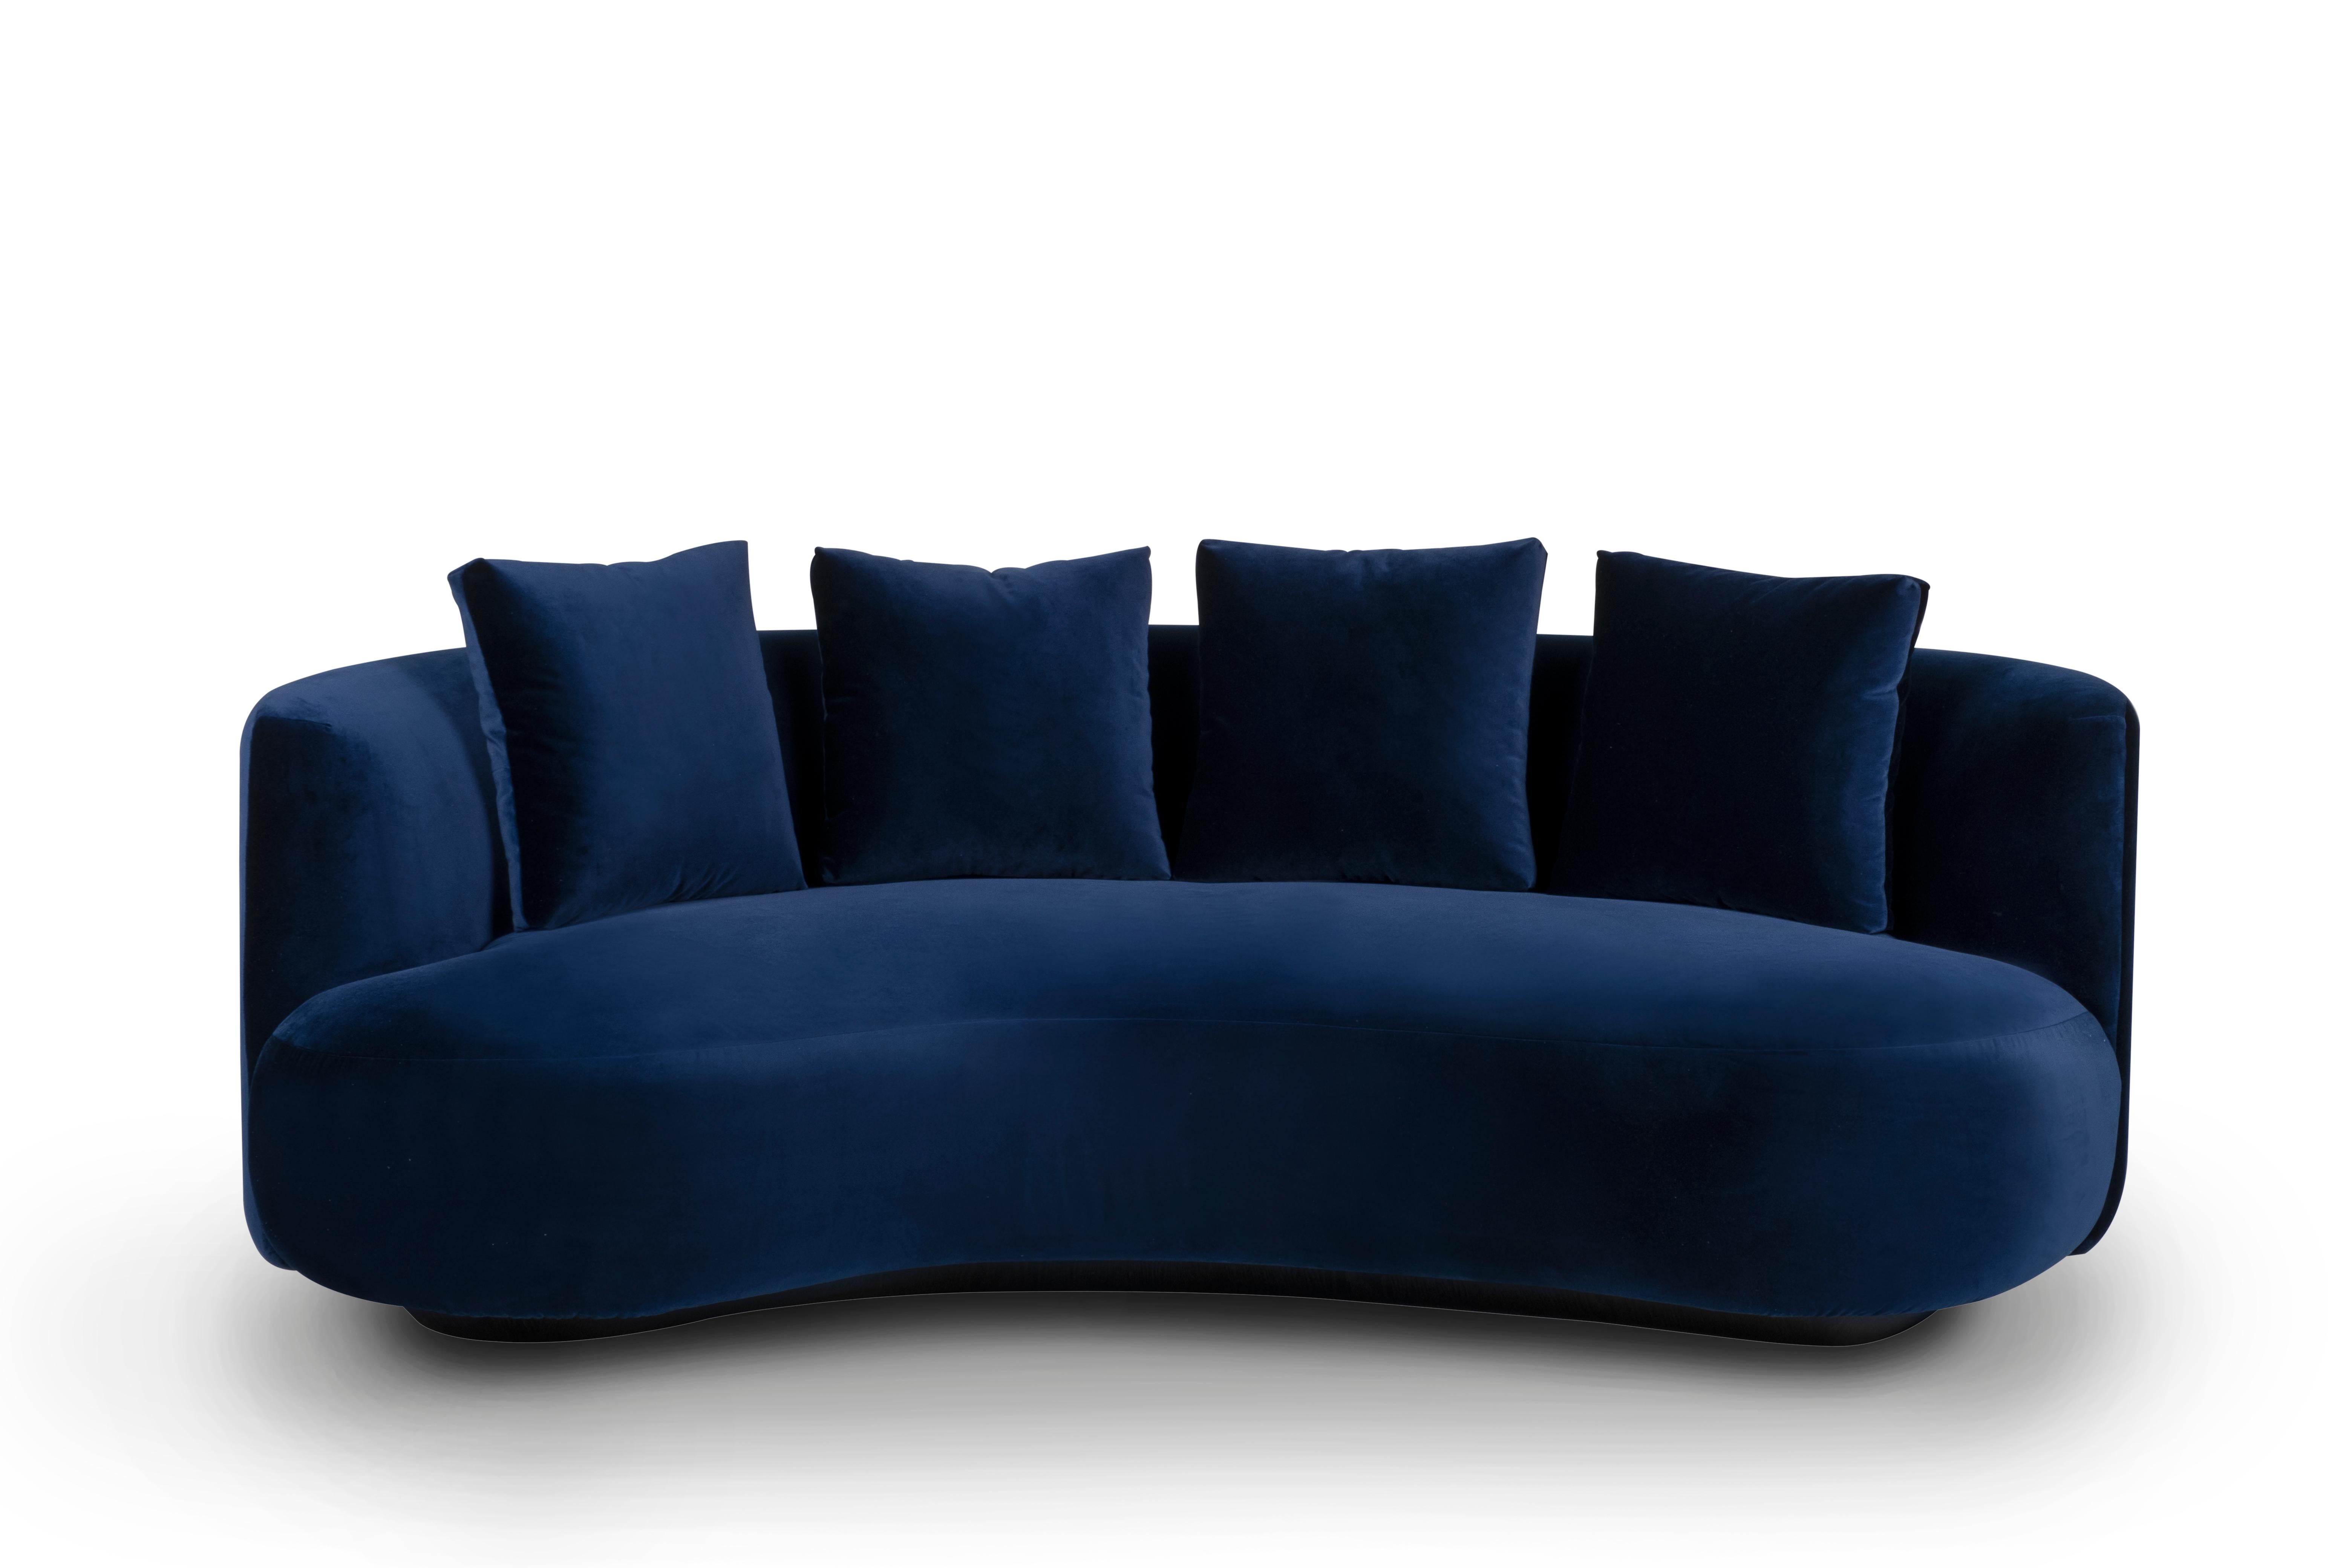 Twins Sofa, Contemporary Collection, Handcrafted in Portugal - Europe by Greenapple.

Designed by Rute Martins for the Contemporary Collection, The Twins curved sofa and day bed share the same genes, yet each possesses a distinct design, creating a